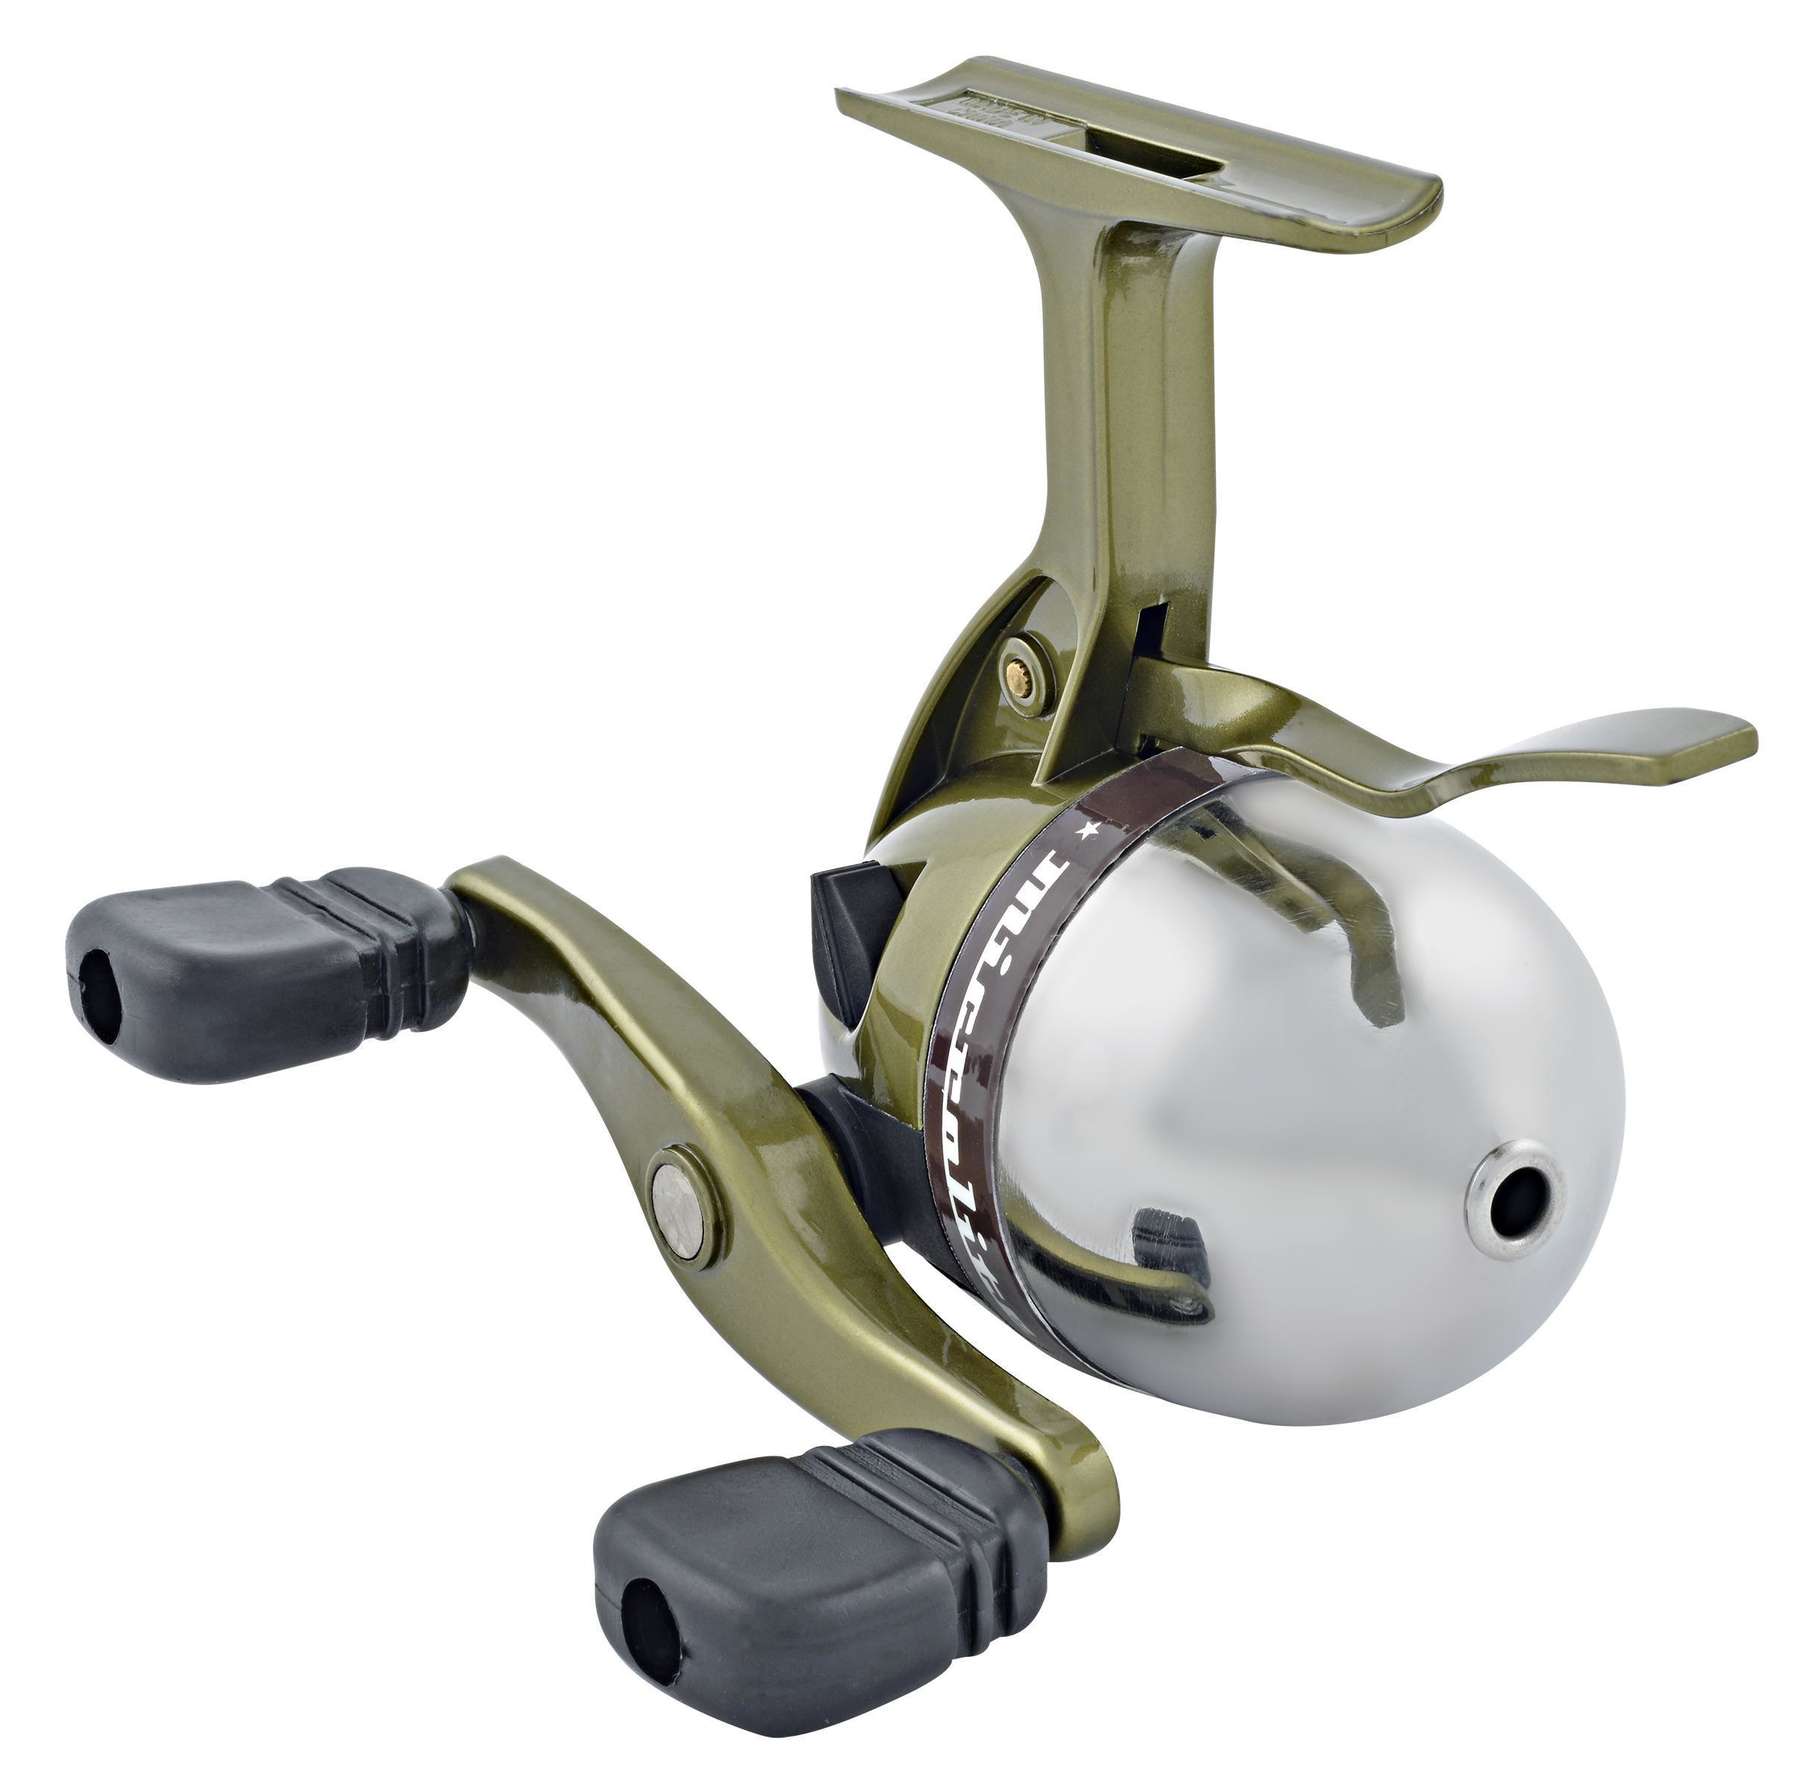 South Bend MCR LT Trigger Spin Reel Clam - Stainless Steel Nosecone